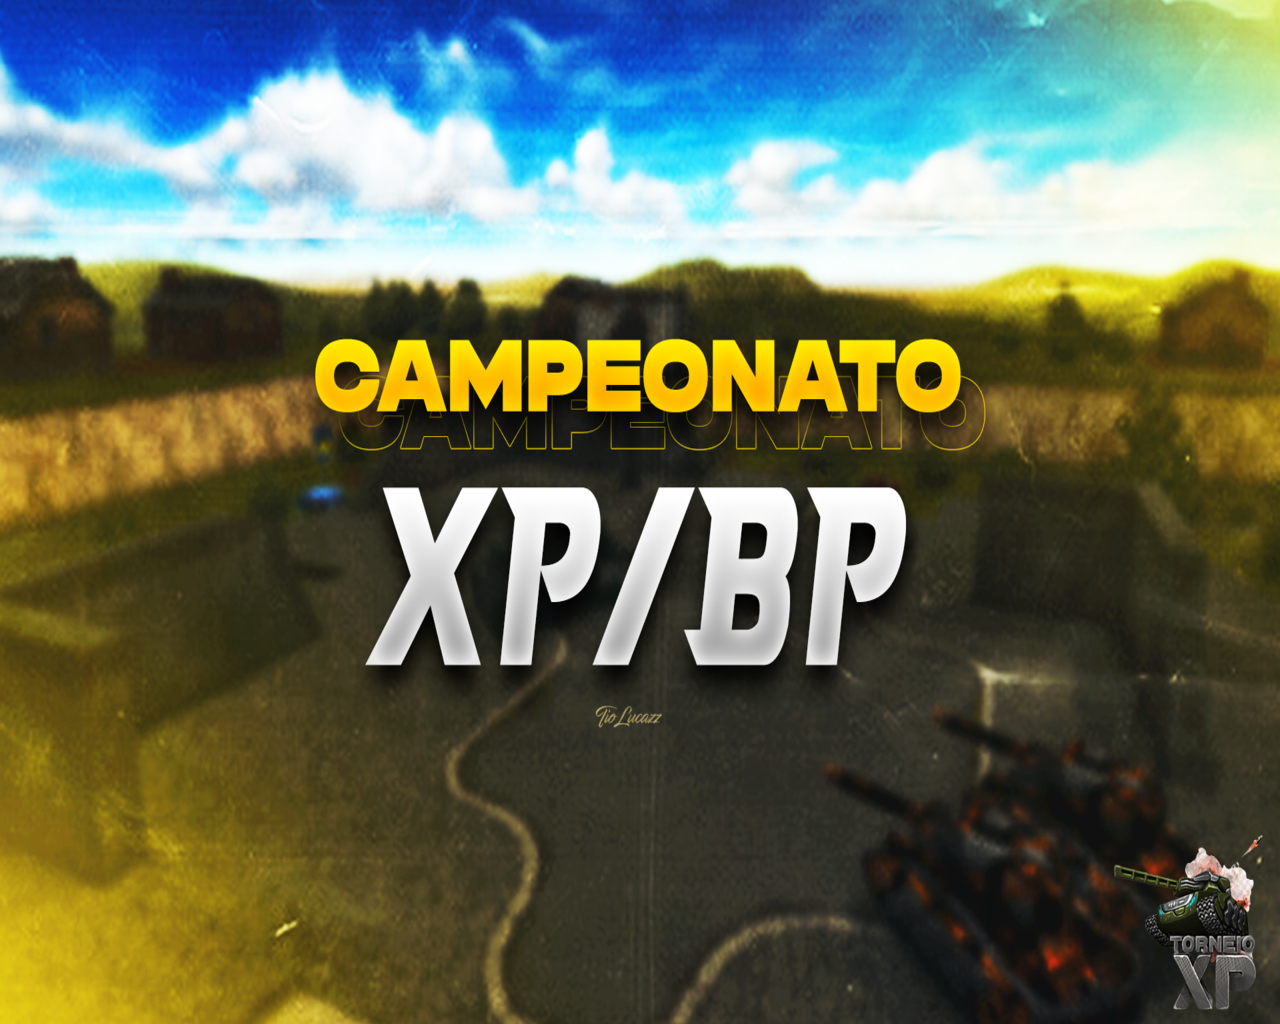 Campeonato-1 (2).png